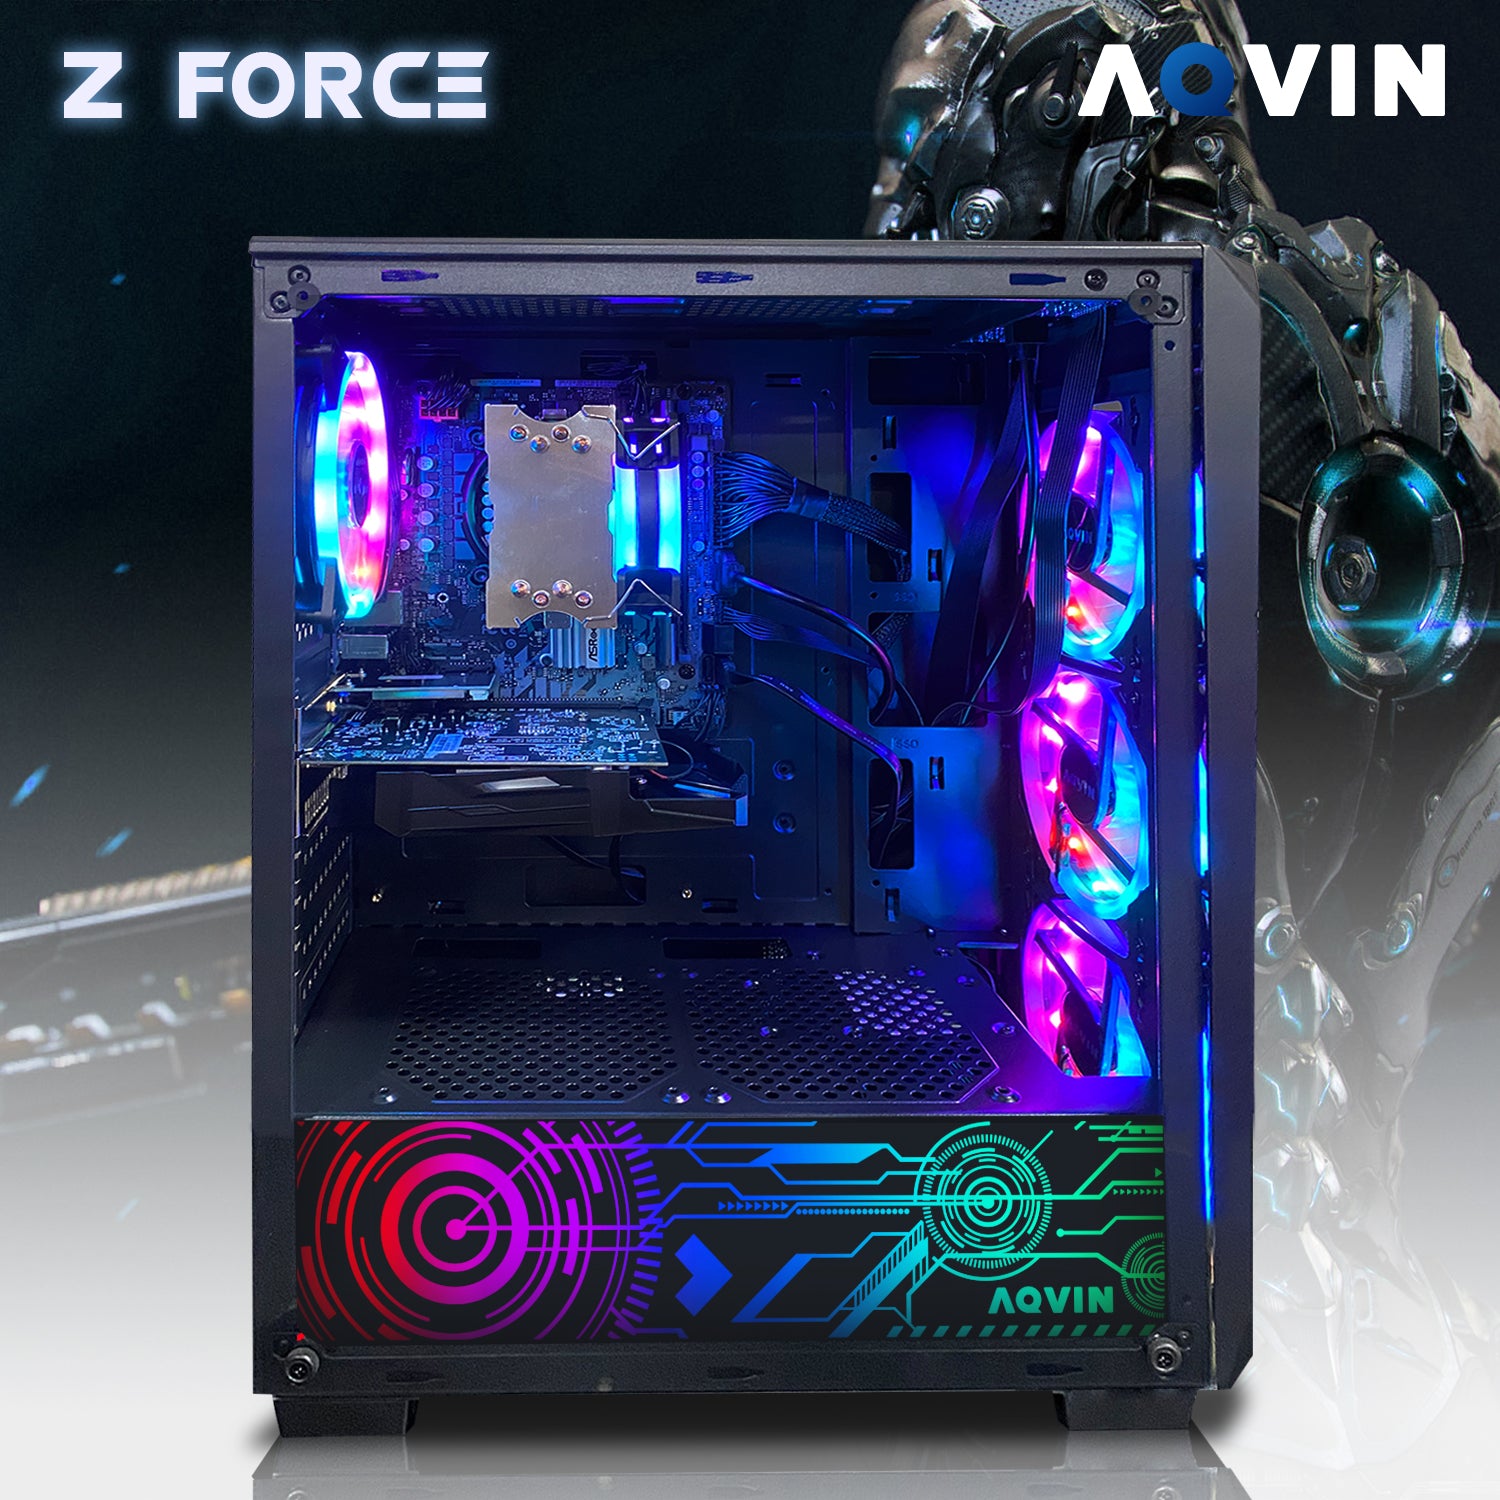 AQVIN Z-Force Gaming Desktop Tower PC/ 24 and 27 inch Curved Screen/ Intel Core i7 up to 4.00 GHz Processor/ RX 580, GTX 1660s, RTX 3050, 3060/ 32GB DDR4 RAM/ 512GB - 2TB SSD/ WIFI/ Windows 10 Pro - Refurbished